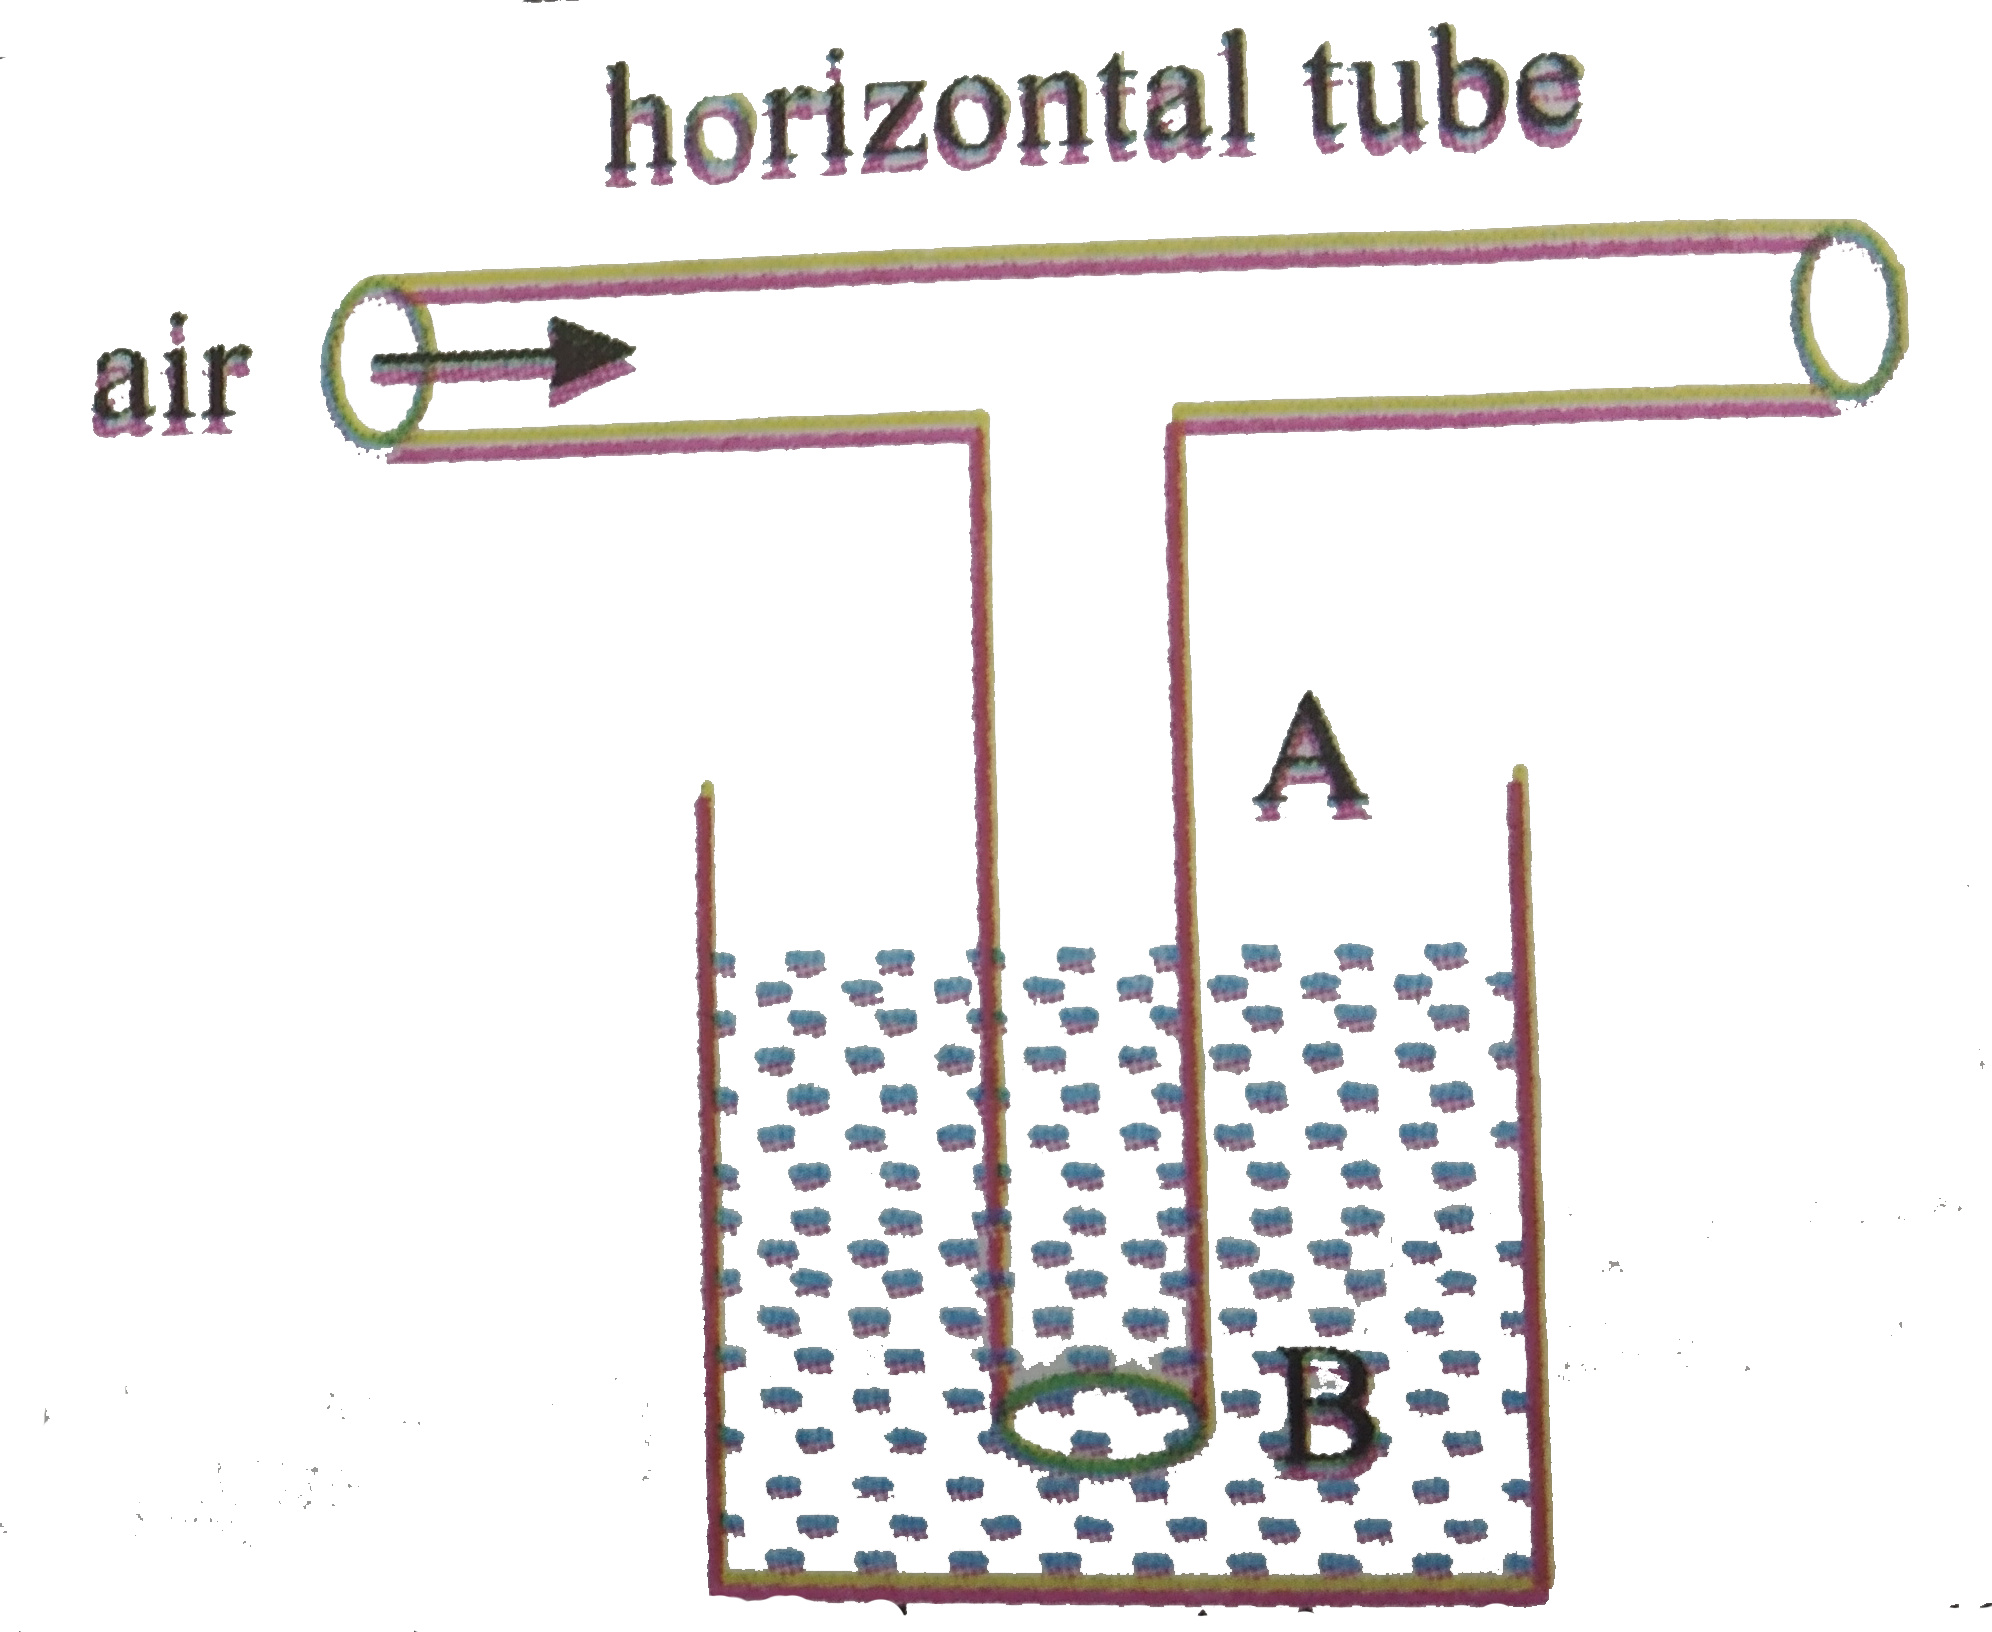 Water stands at level A in the arrangement shown in figure. If a jet of air is gently blown into the horizontal tube in the direction shown in figure, then